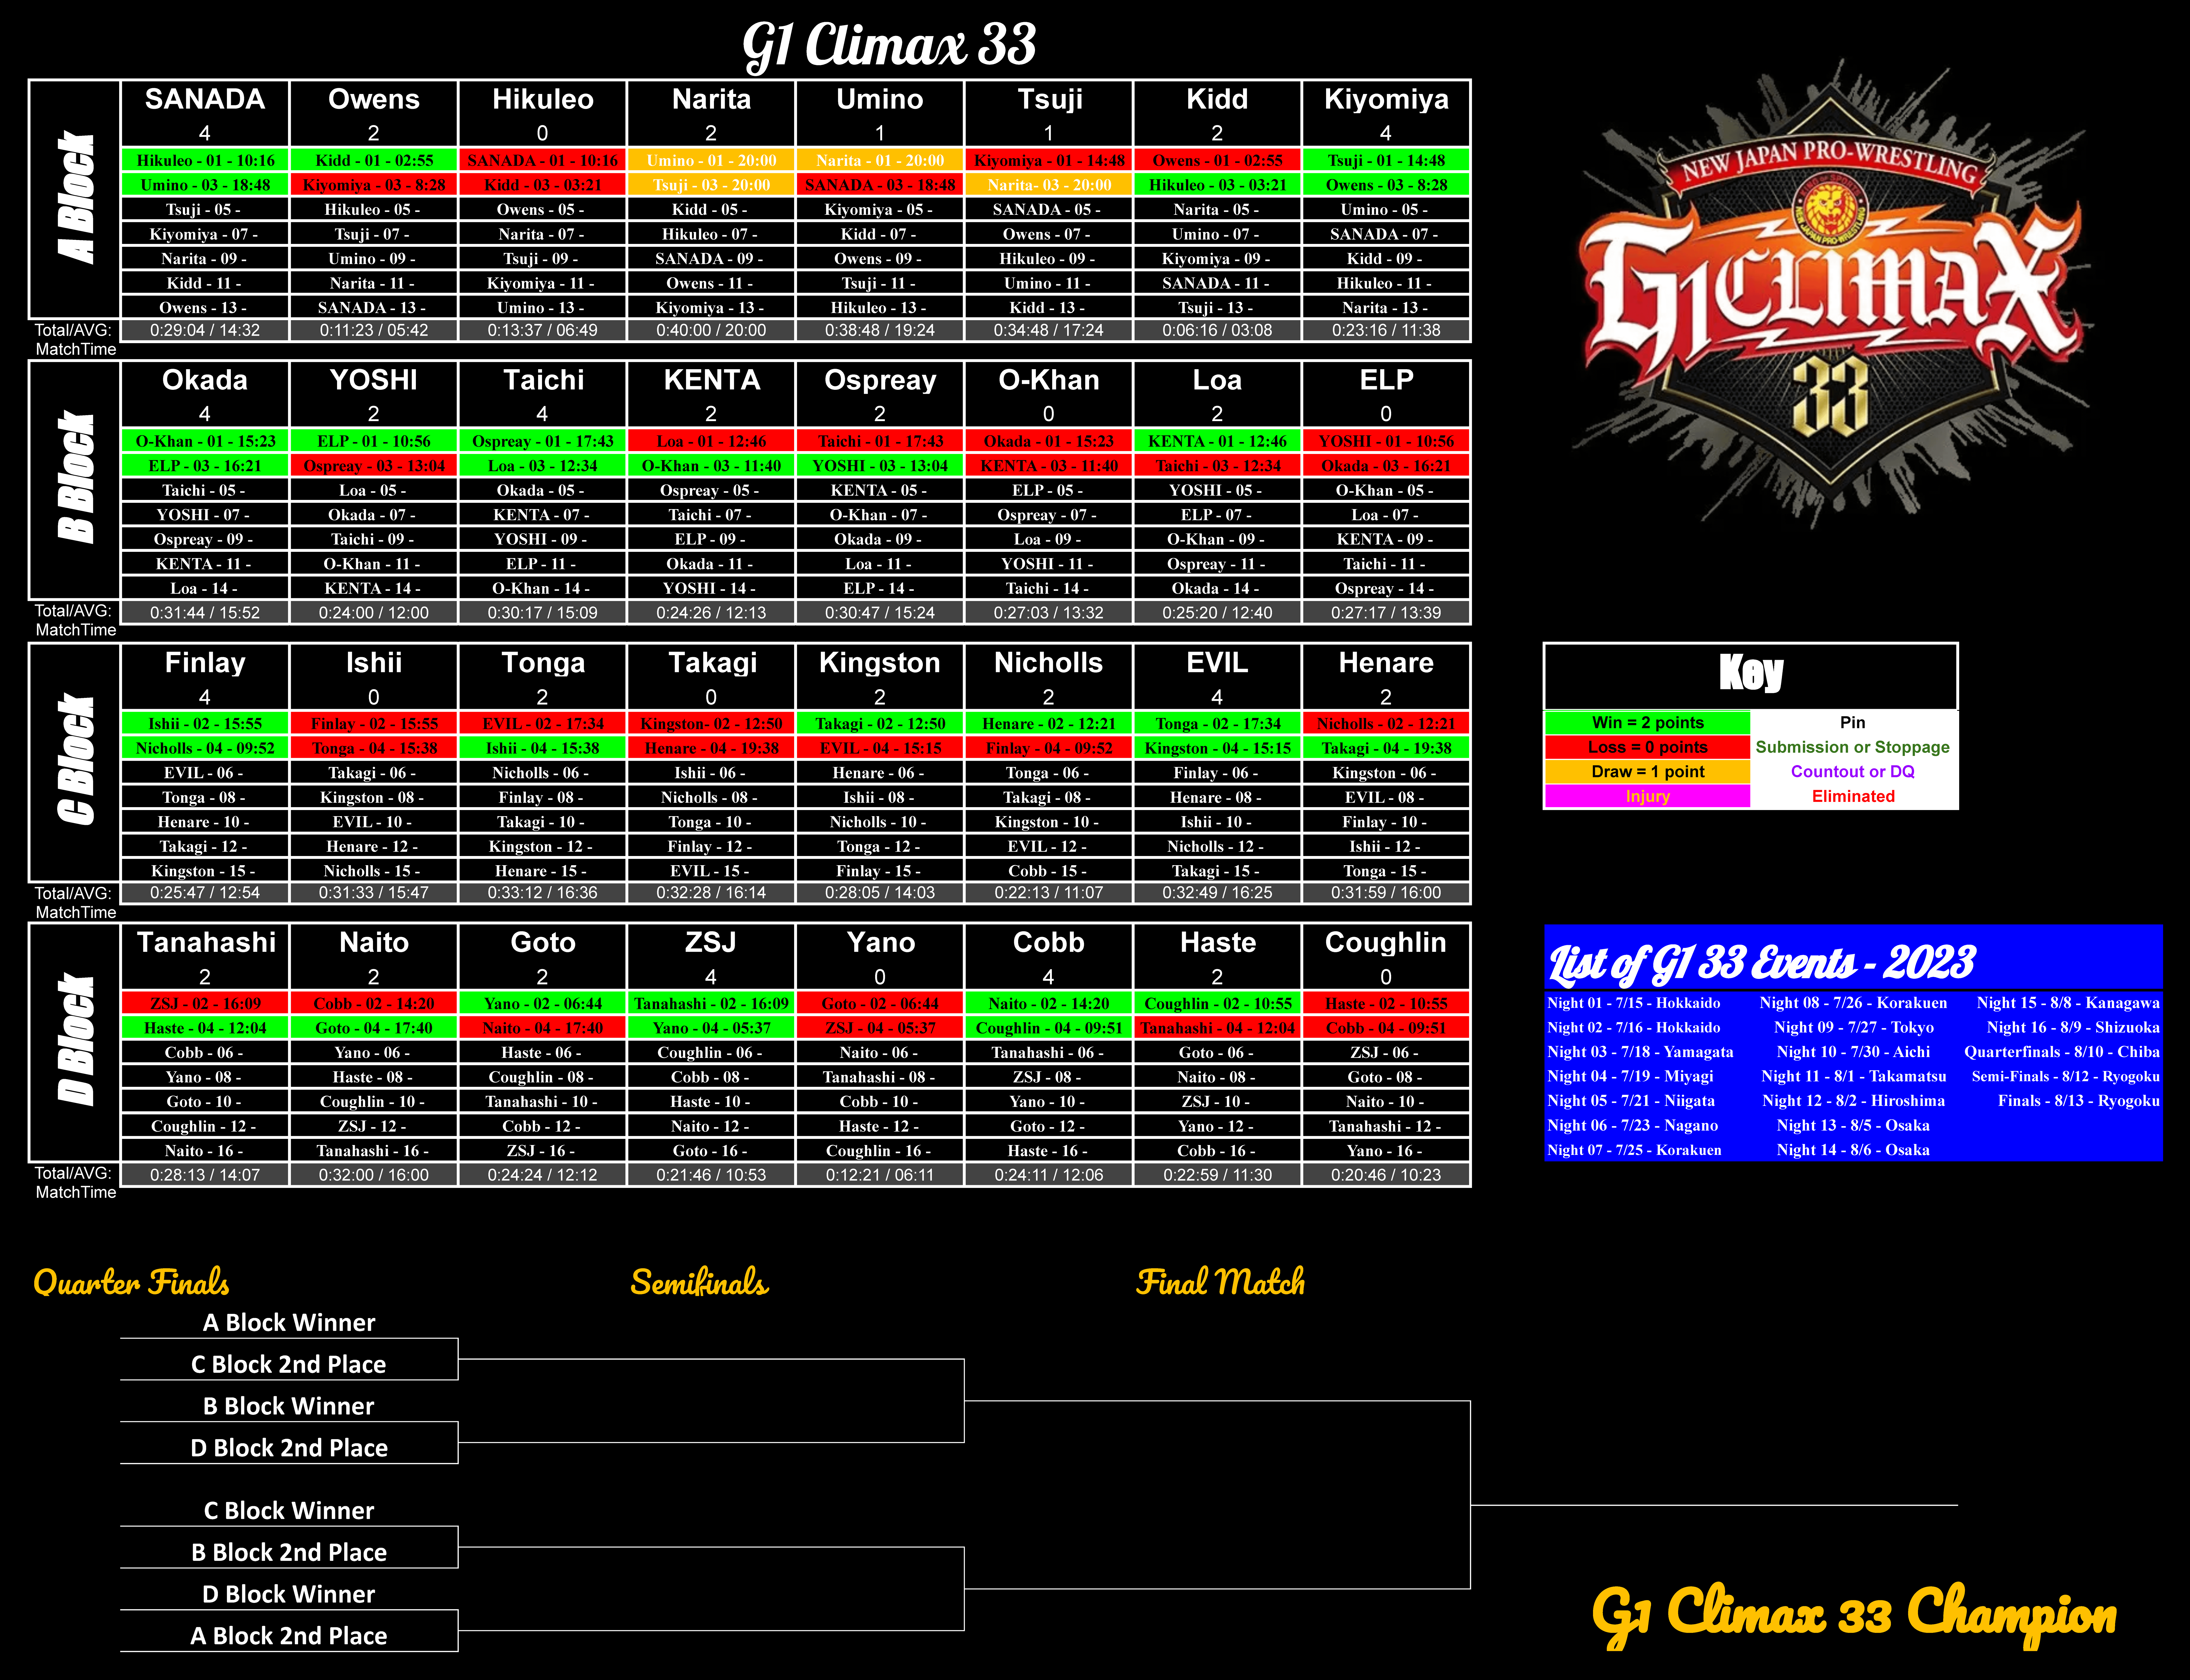 G1 Climax 33 Standings After Night 5